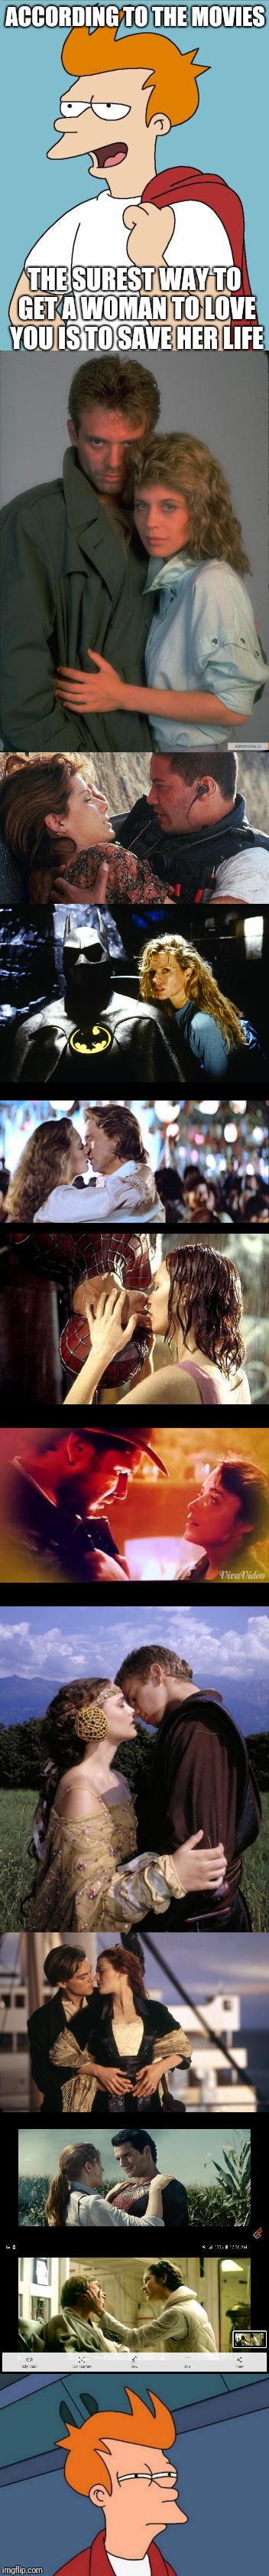 Ummm... | ACCORDING TO THE MOVIES; THE SUREST WAY TO GET A WOMAN TO LOVE YOU IS TO SAVE HER LIFE | image tagged in memes,movie,love,hero,women | made w/ Imgflip meme maker